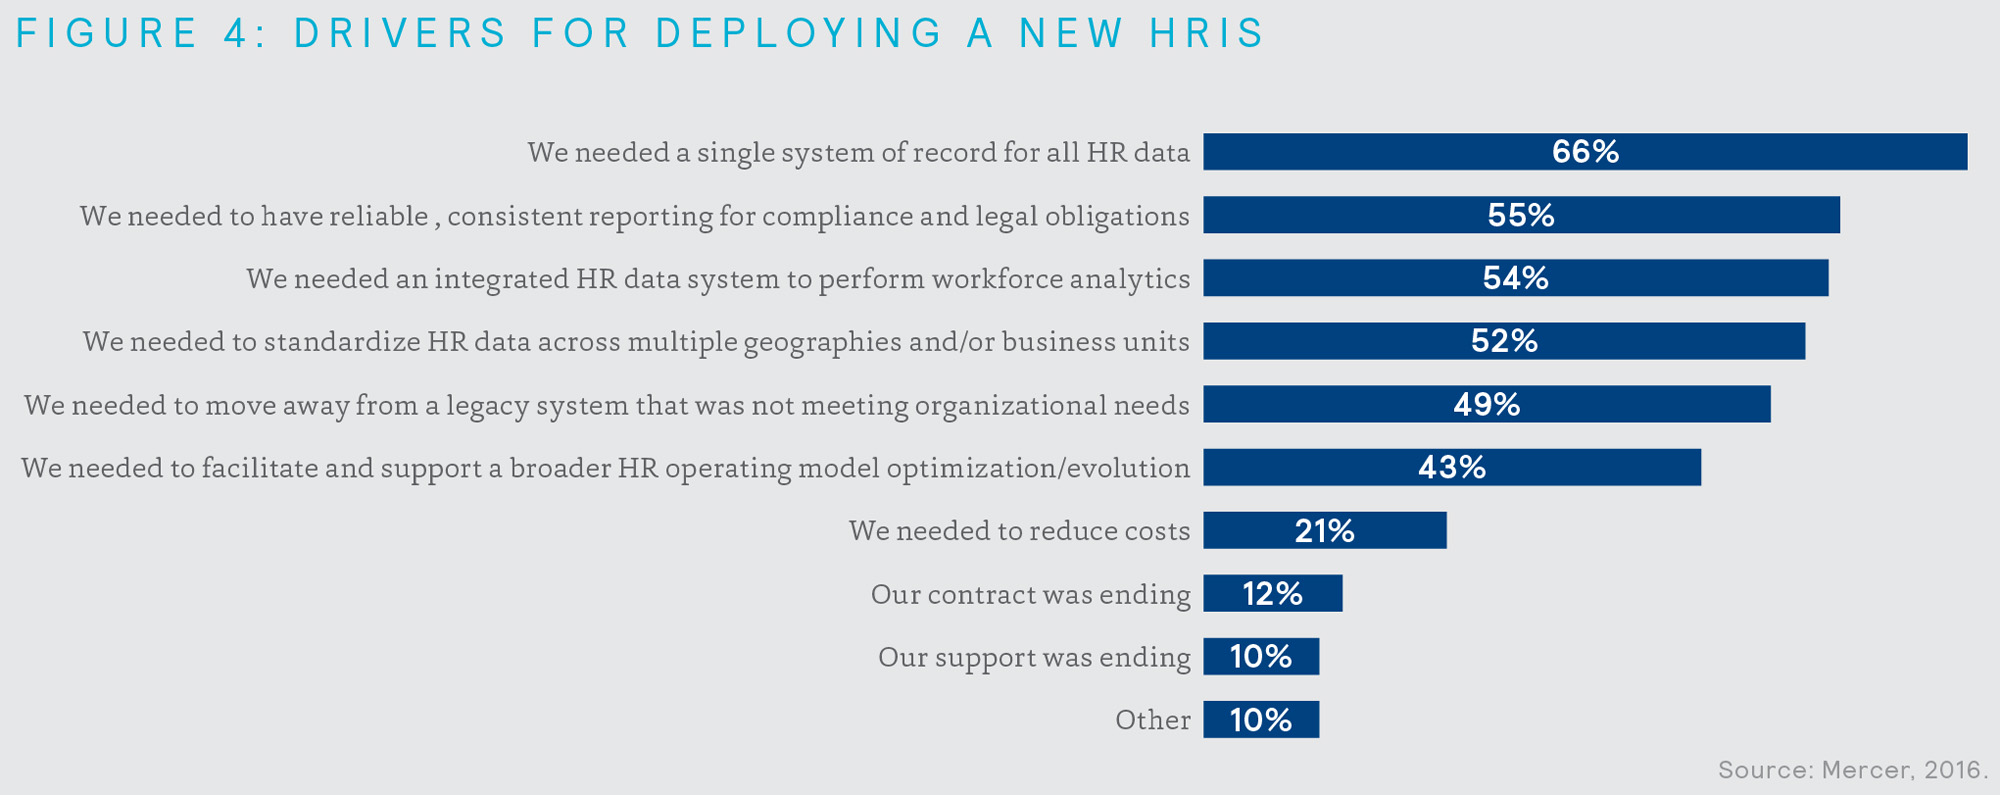 Drivers for deploying a new HRIS